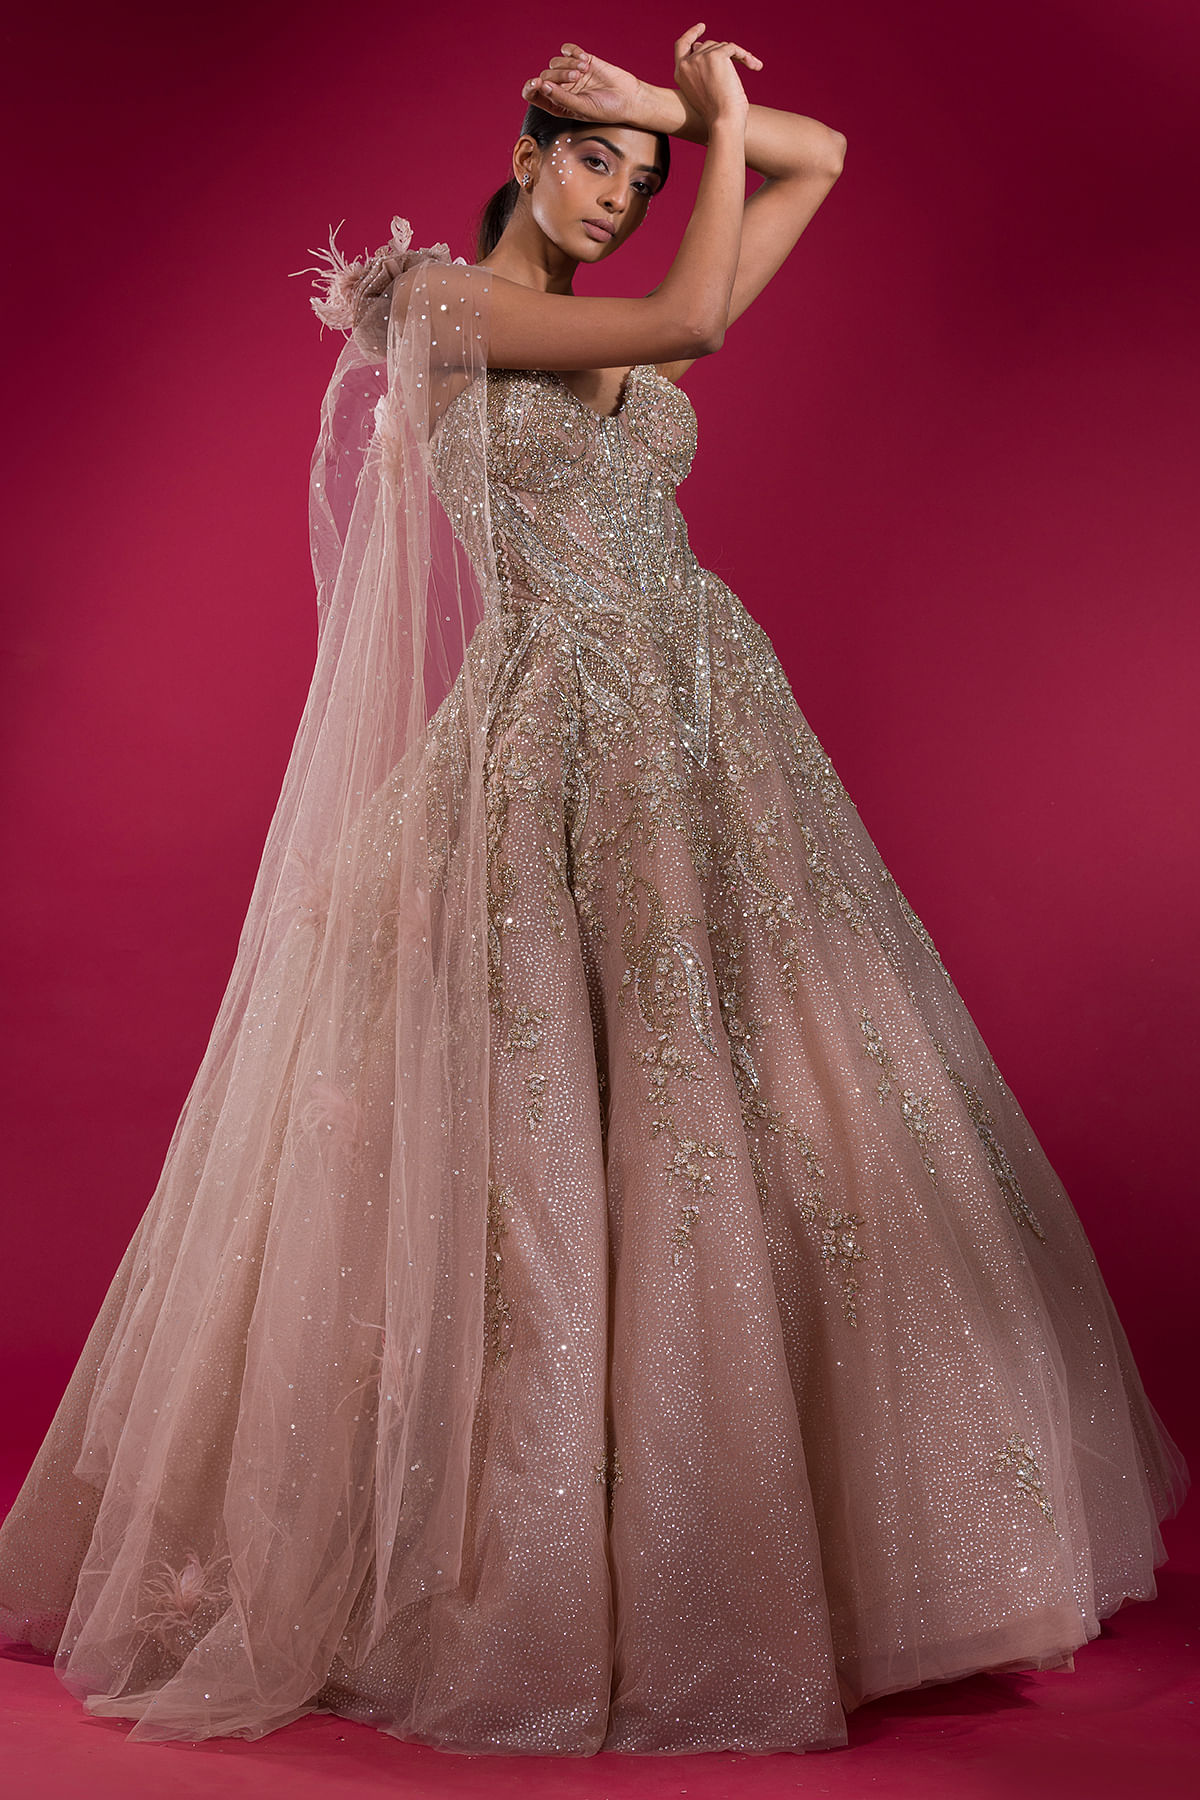 Pretty in pink: Pink wedding dresses, bridesmaids dresses, accessories and  more… - BLOG | IE